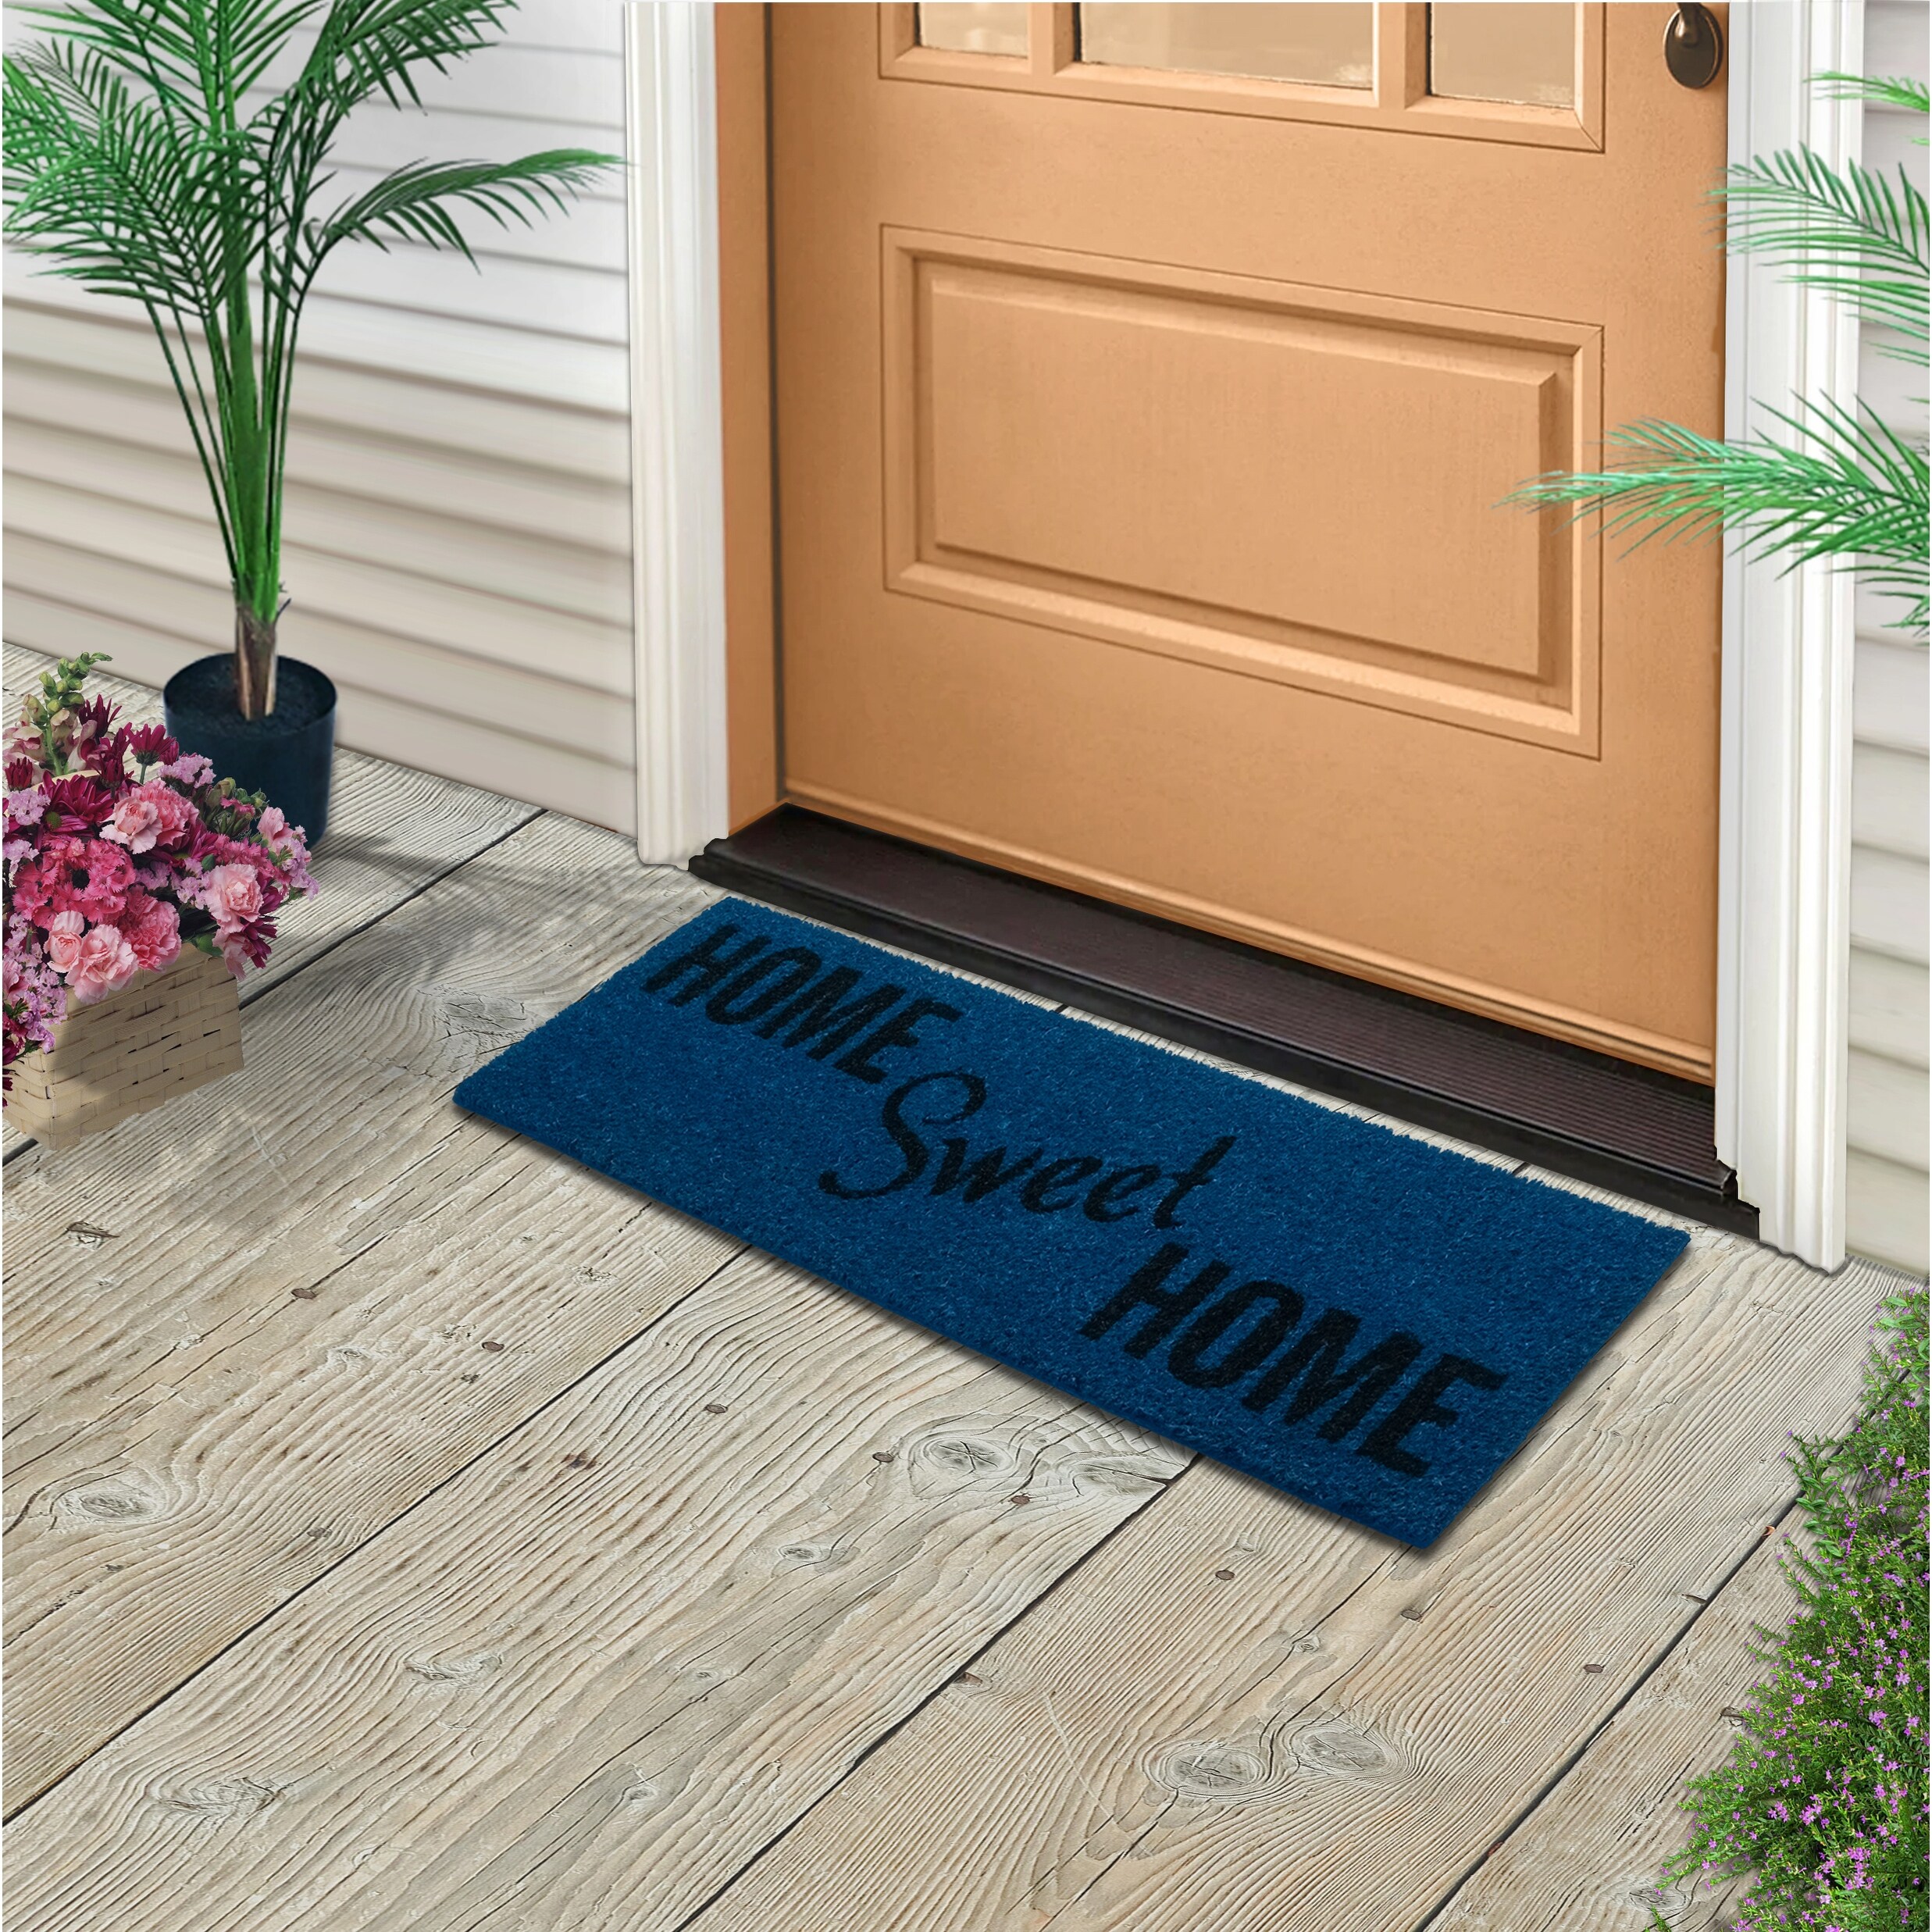 https://ak1.ostkcdn.com/images/products/is/images/direct/9fa2c85a8bc5ea4ebc12de59562d71b2e22bcffd/Mascot-Hardware-Entrance-Doormat-%7C-Indoor-and-Outdoor-%7C-30in-x-10in-%7C-Non-Slip-Backing-%7C-All-Season.jpg